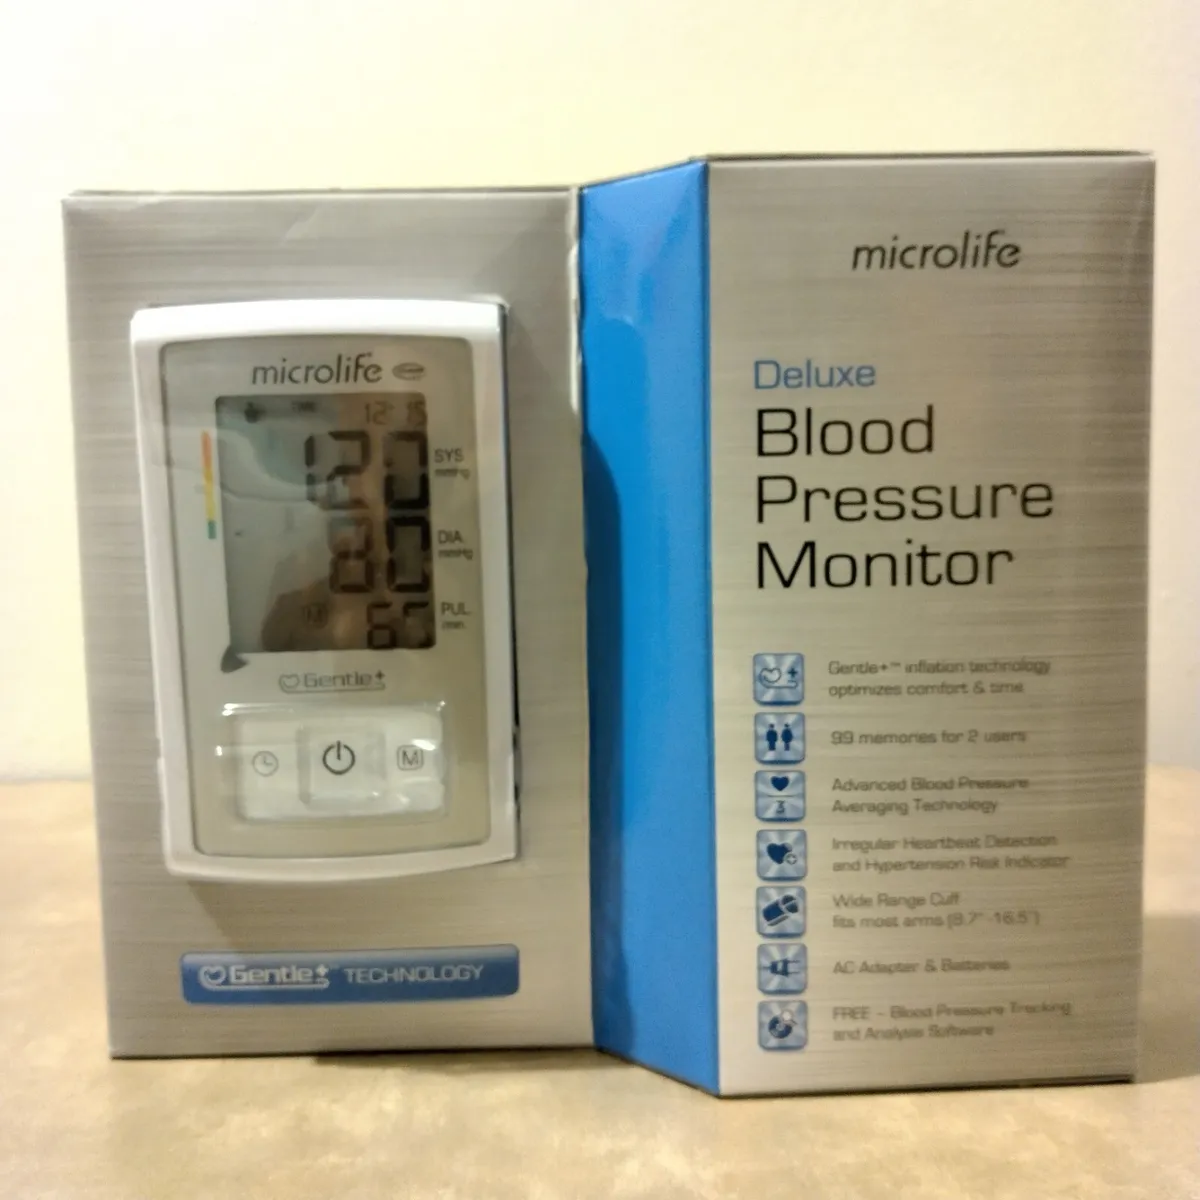 Microlife Deluxe BP3GX1-5X Blood Pressure Monitor Review